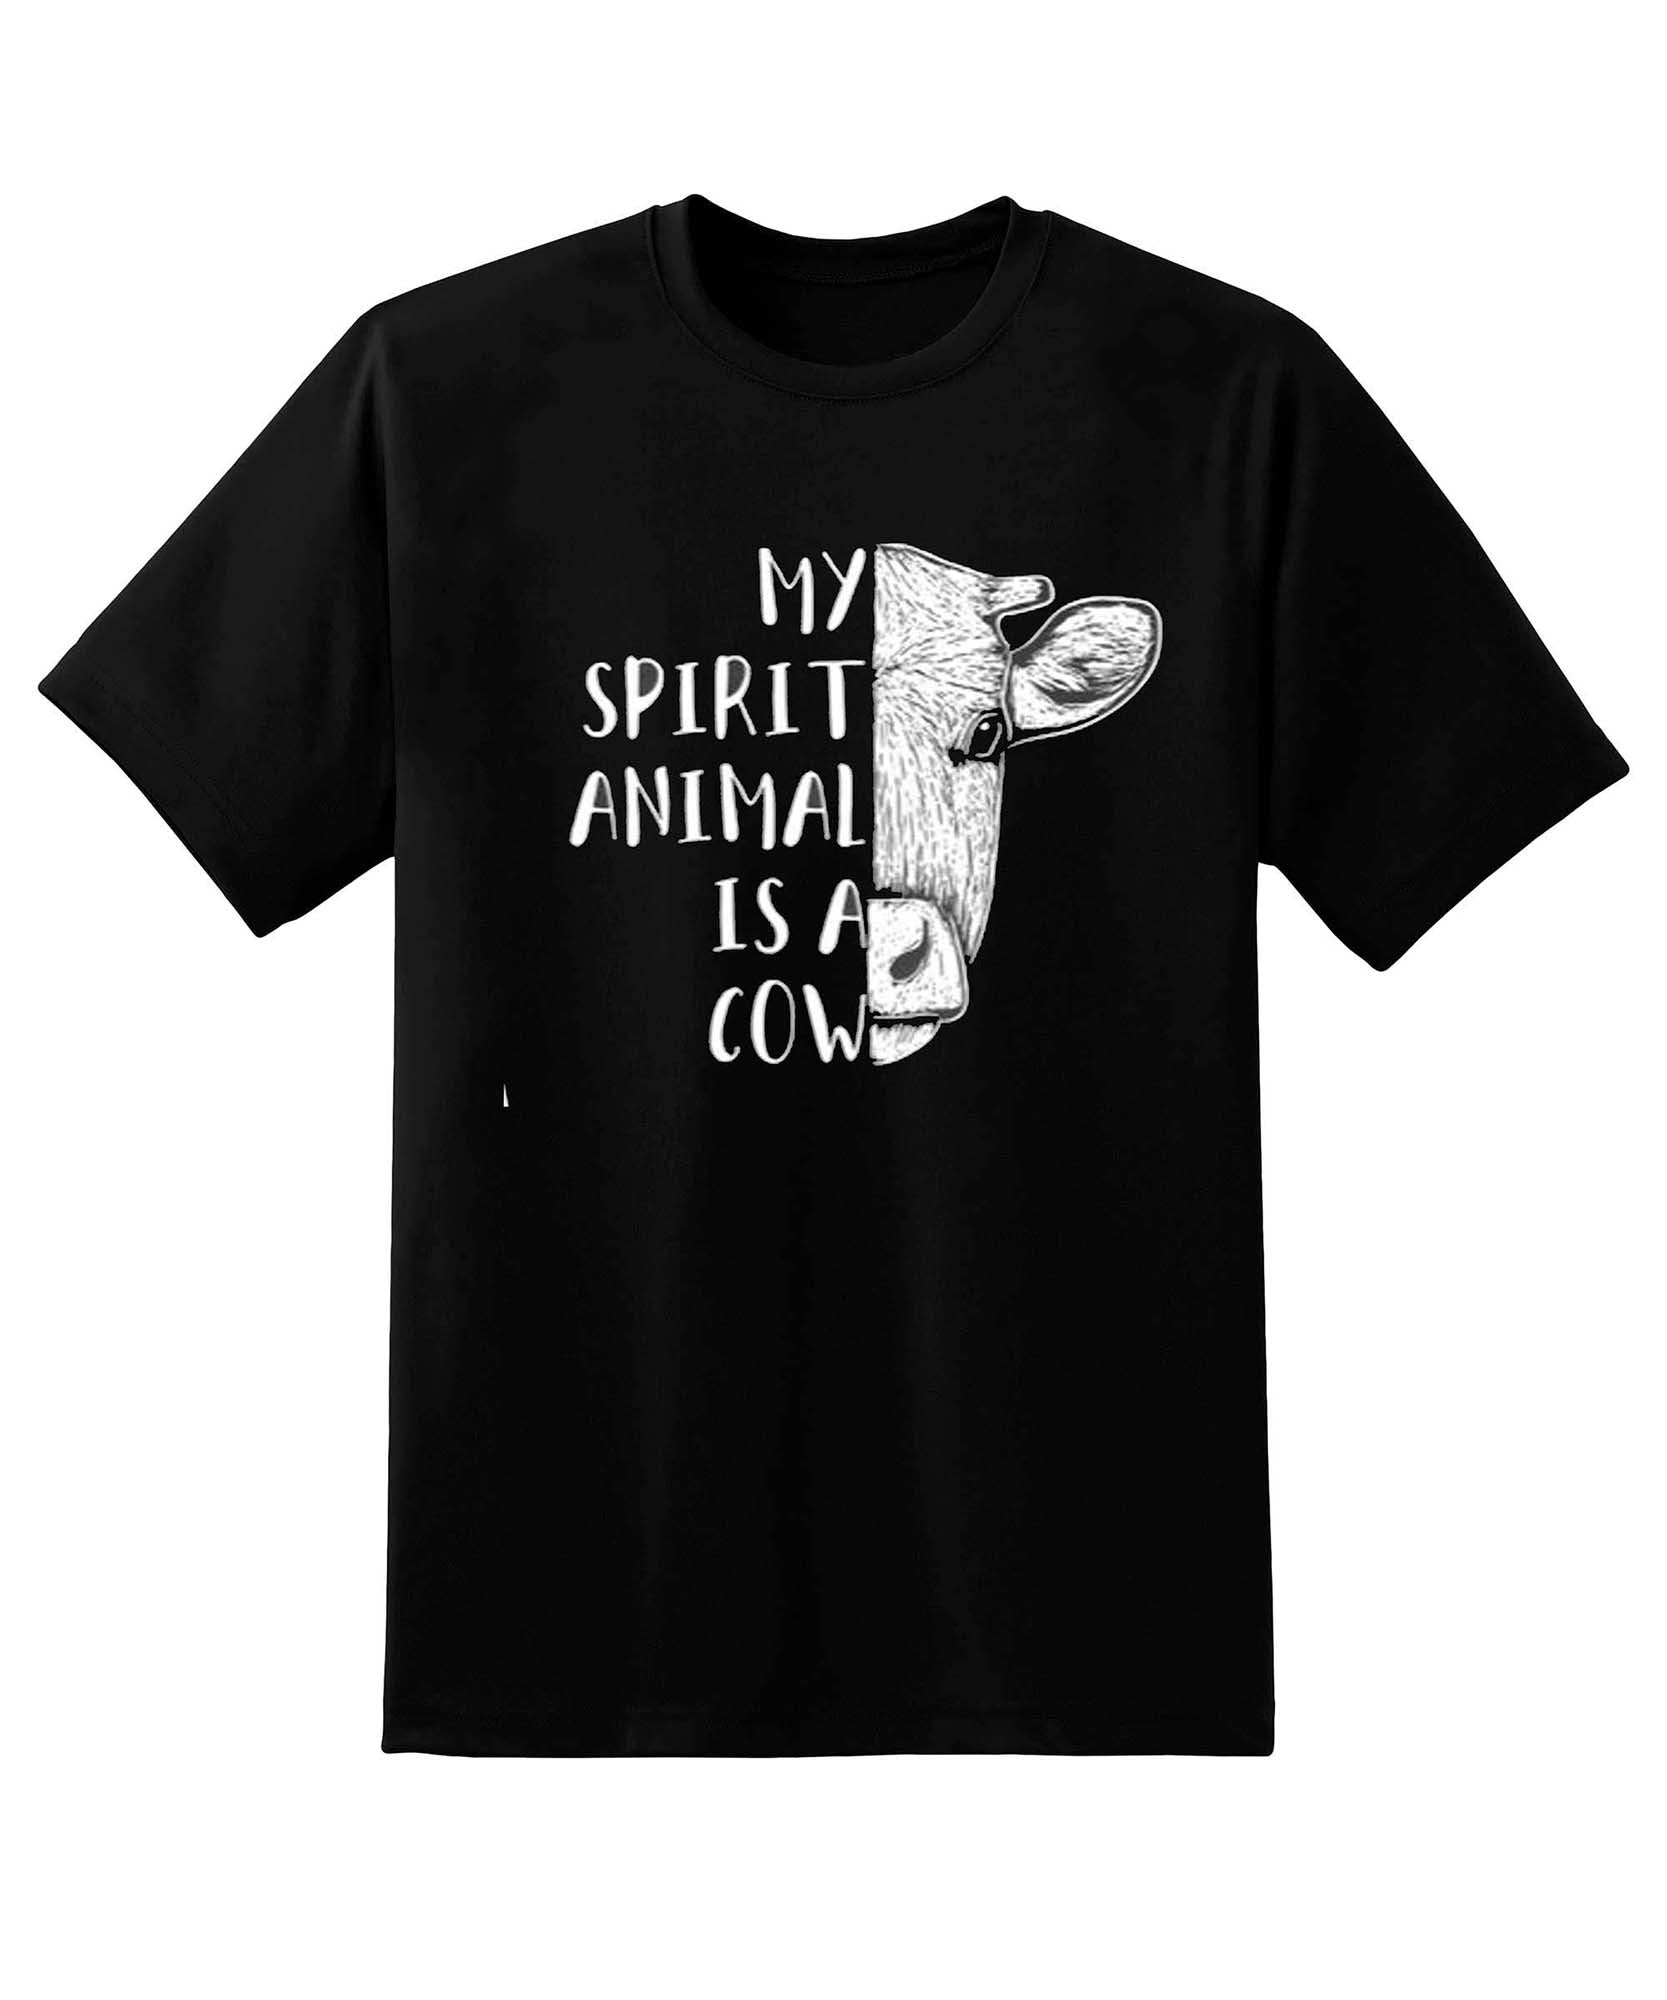 Skitongift My Spirit Is A Cow Funny Shirts Hoodie Sweater Short Sleeve Casual Shirt